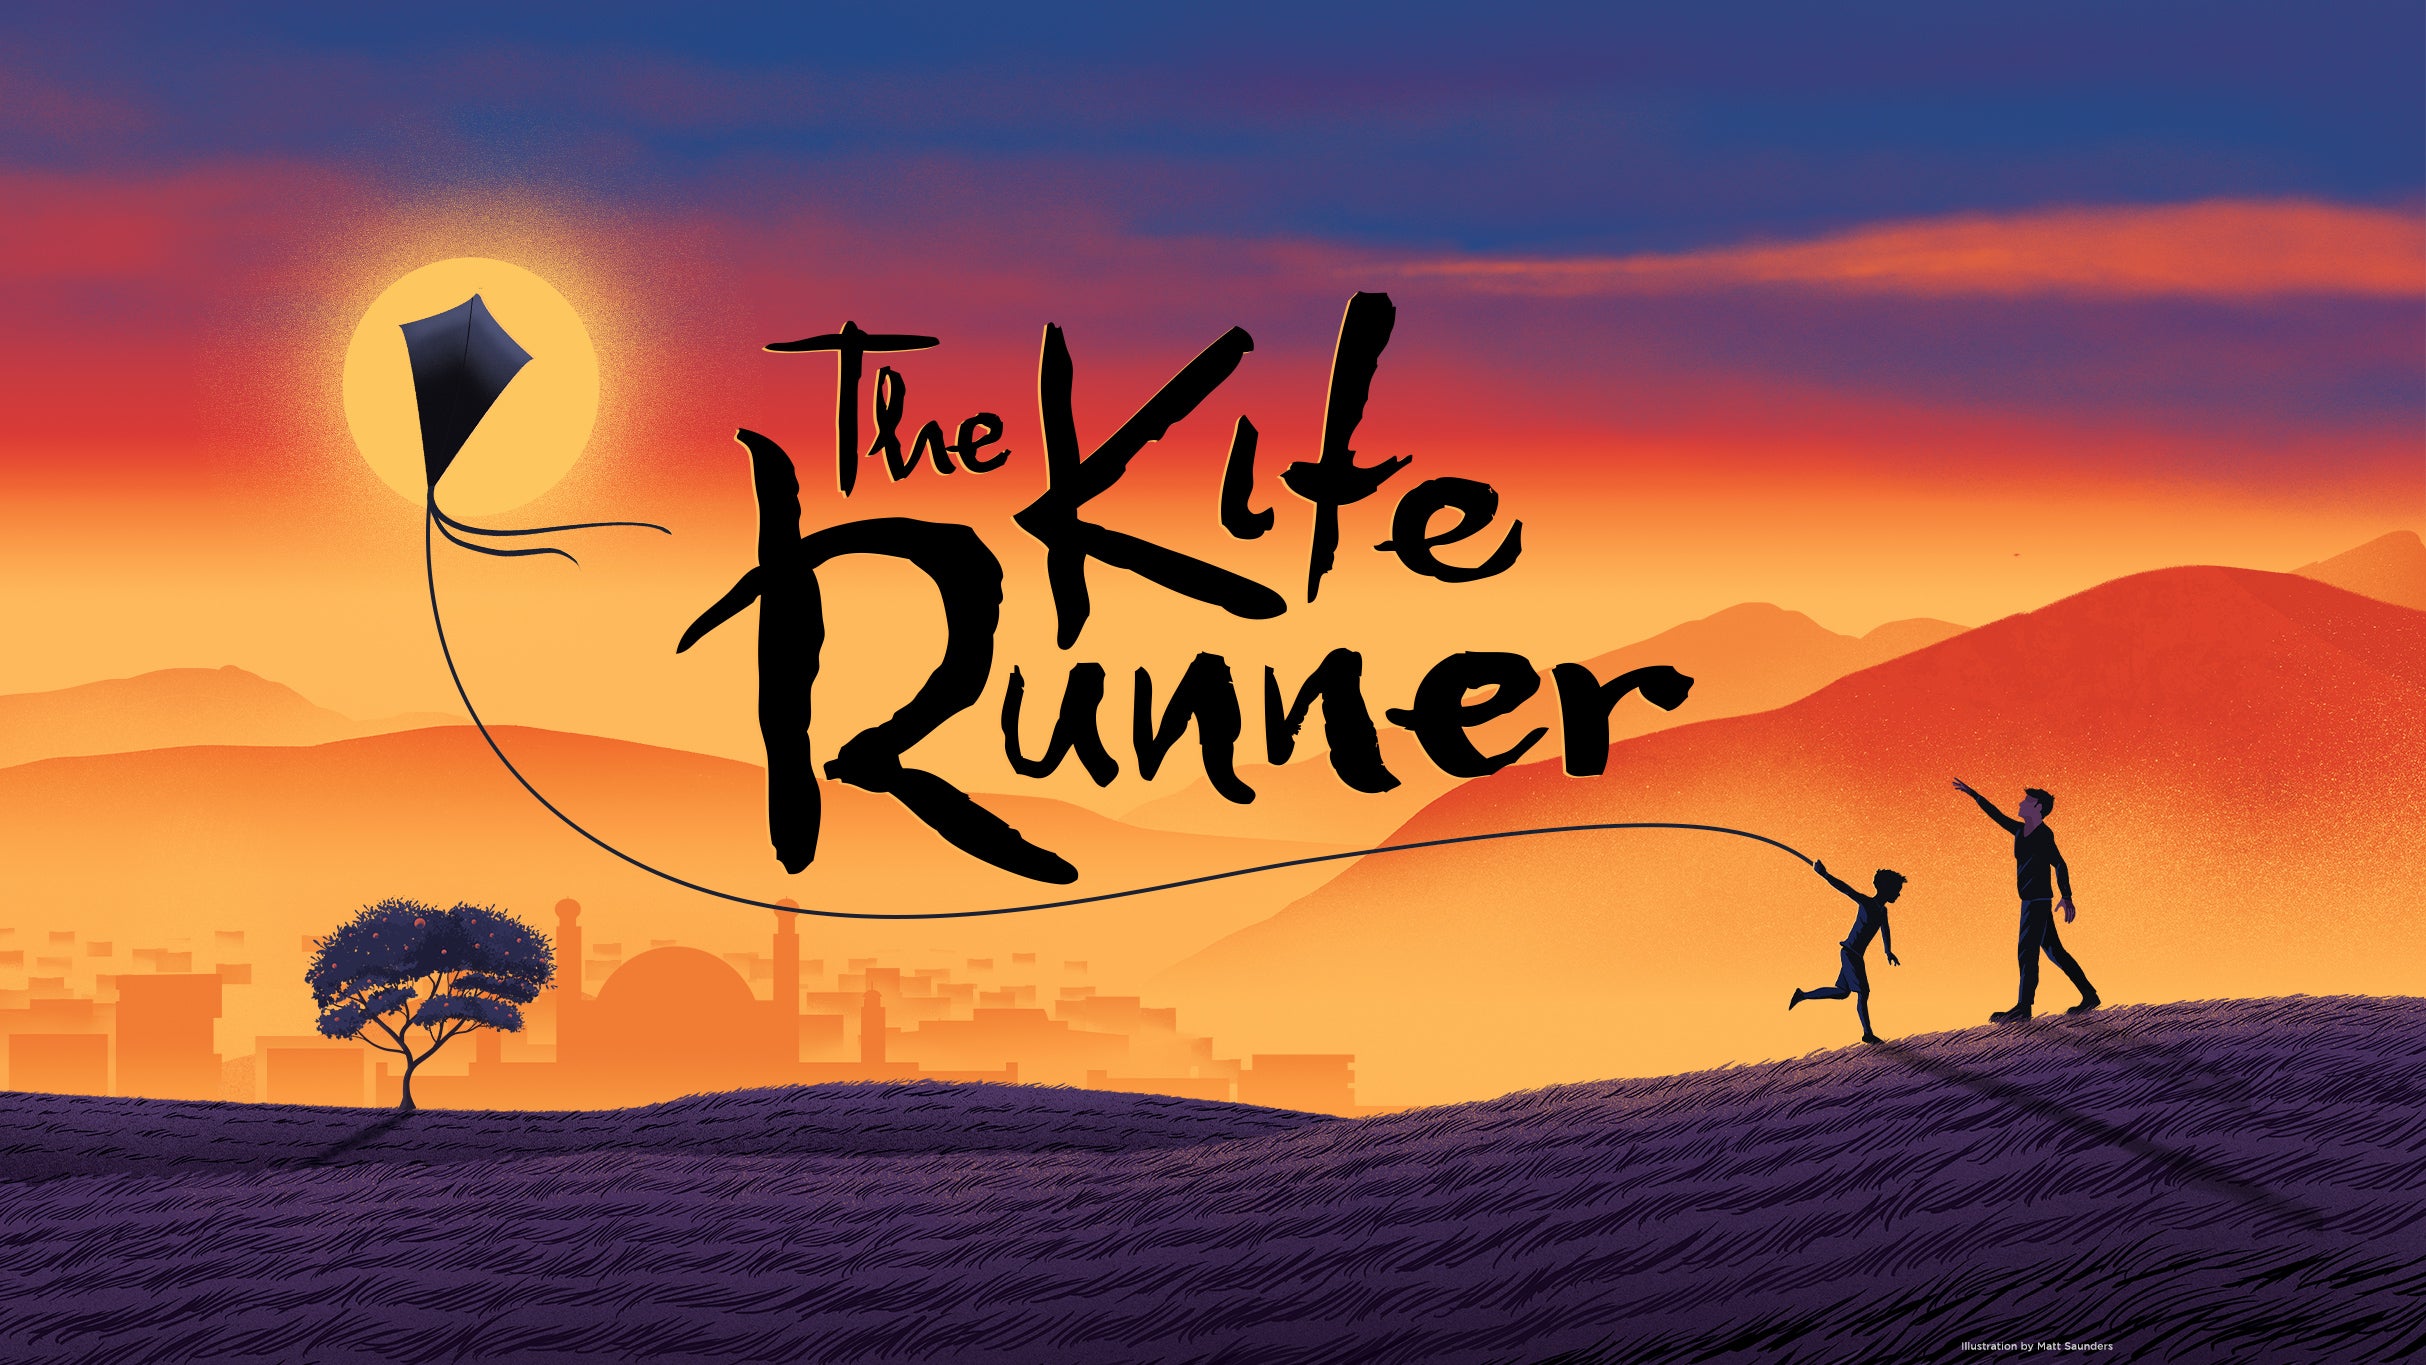 The Kite Runner (Chicago) at CIBC Theatre